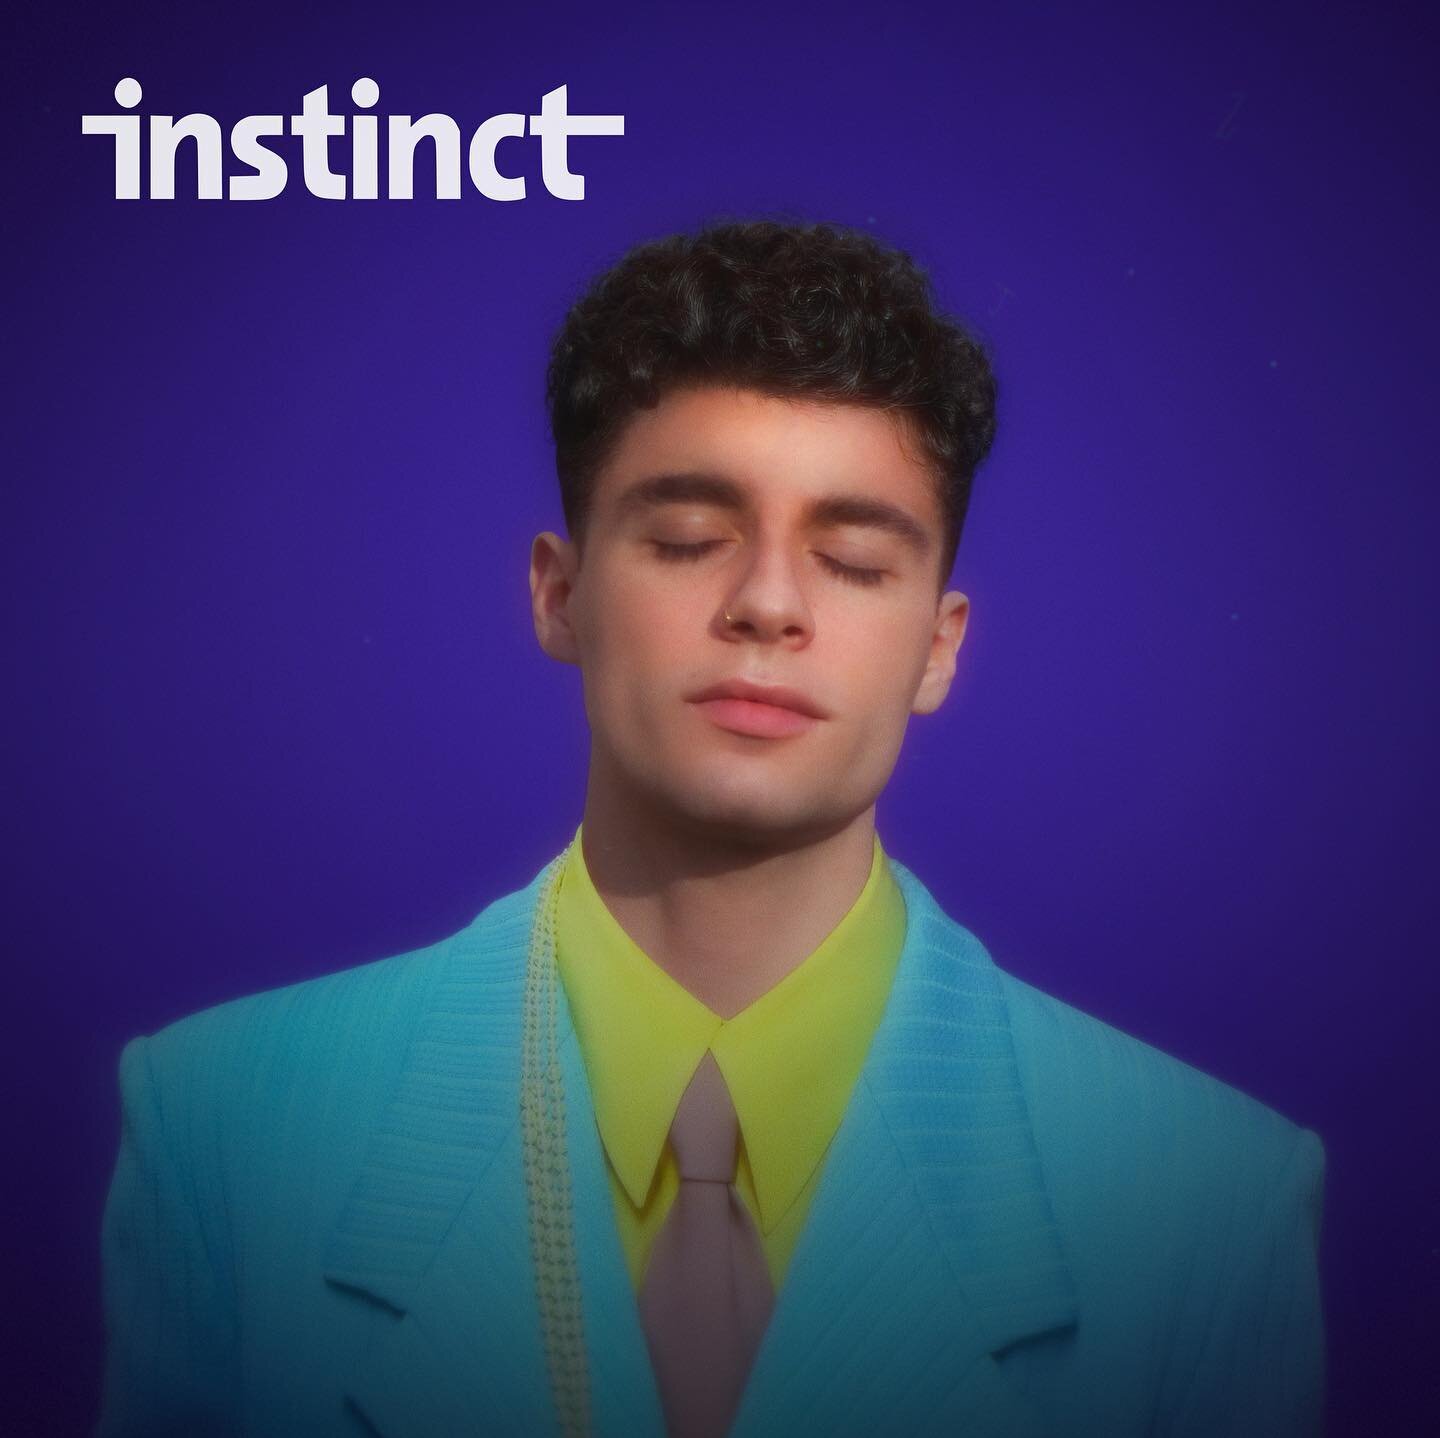 Thank you @instinctmagazine for featuring my latest single &ldquo;Australia!&rdquo; (Link in bio.)

&ldquo;Australia&rdquo; is the third single drawn from the upcoming album Strangers by synth-pop artist Kent&ouml;, The out singer/songwriter says the